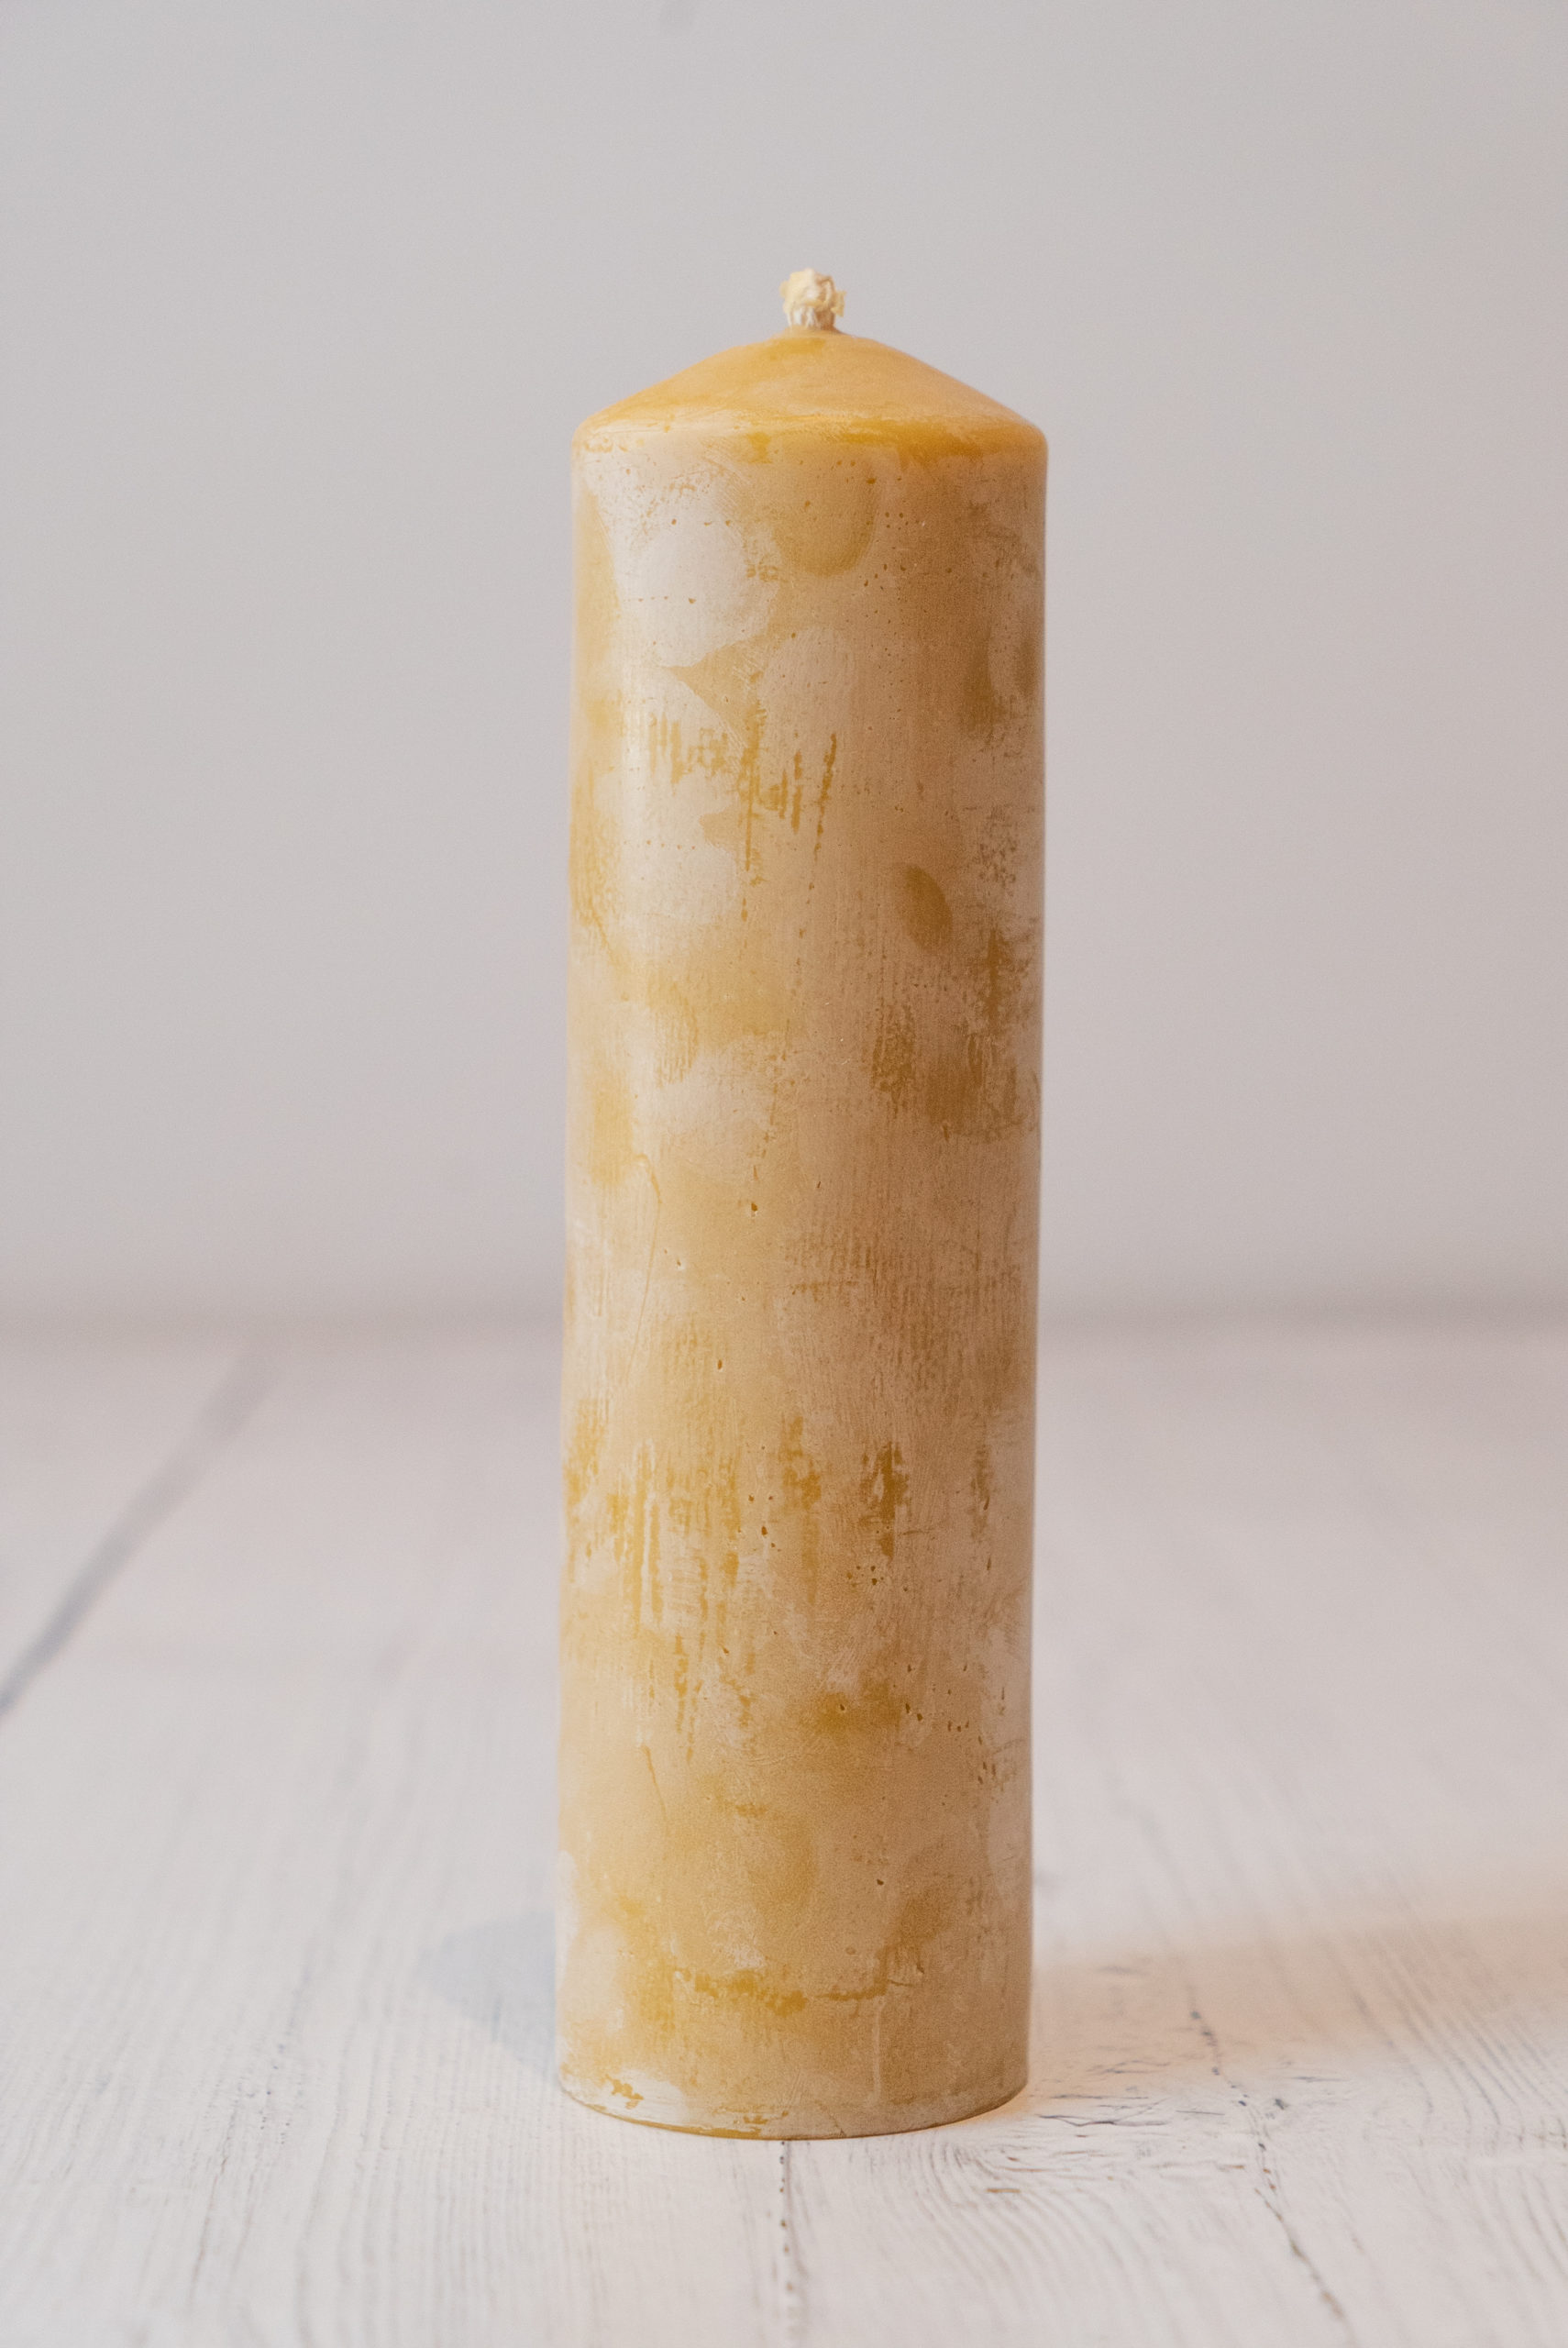 https://miod.co/wp-content/uploads/2020/11/Large-Pillar-Beeswax-Candle-scaled.jpg